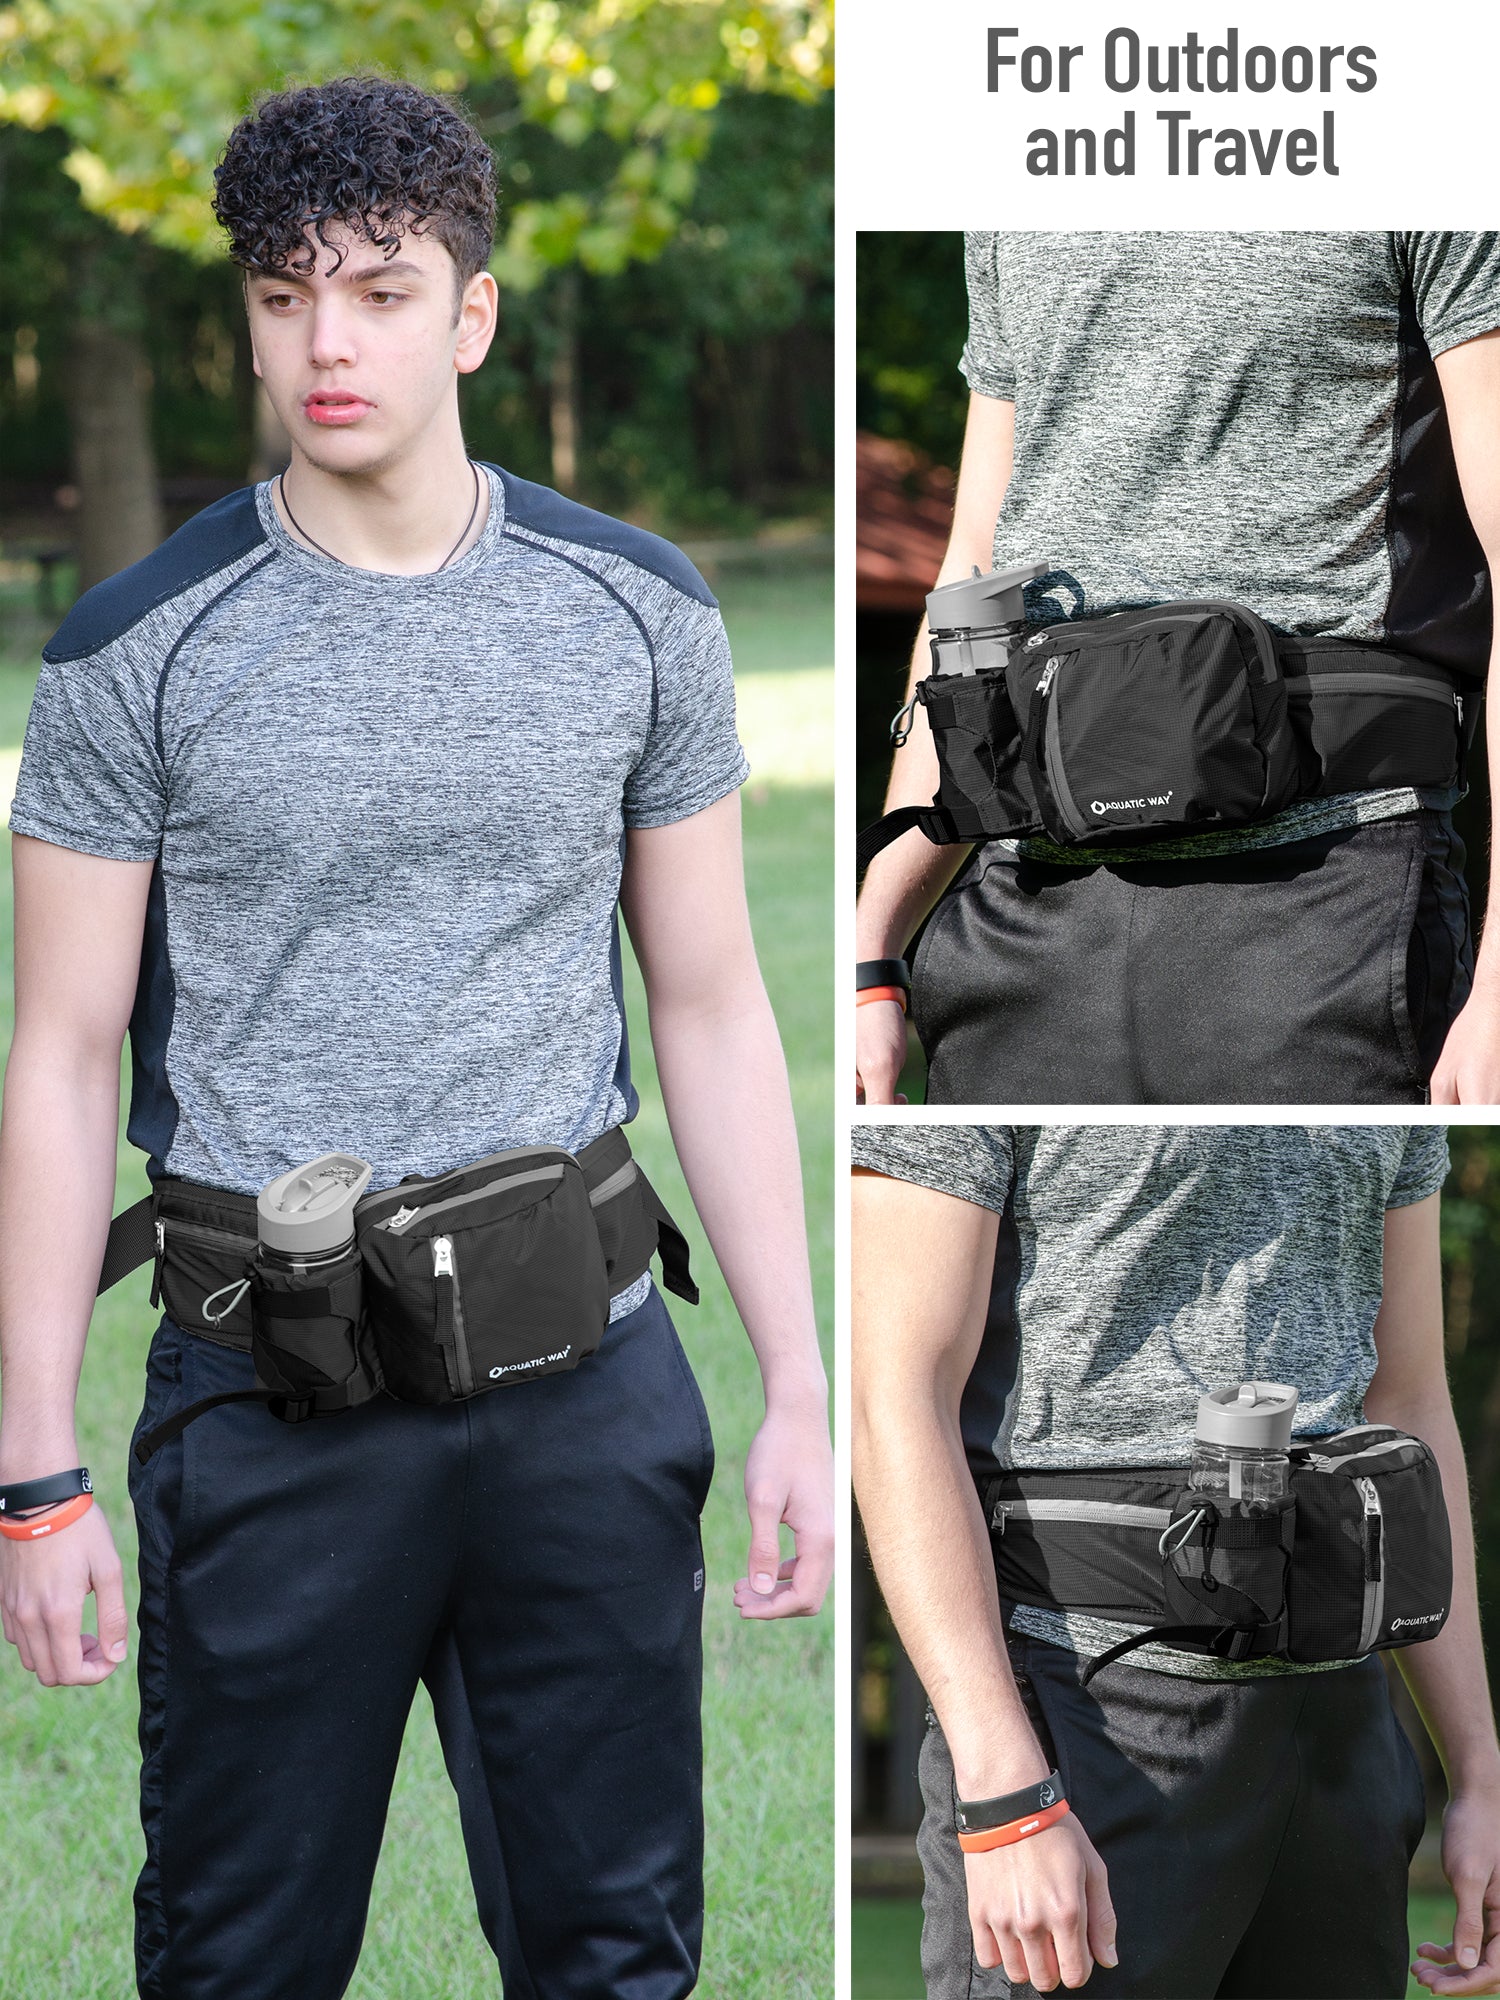 Hiking Waist Pack Fanny Pack With Water Bottle Holder For Men